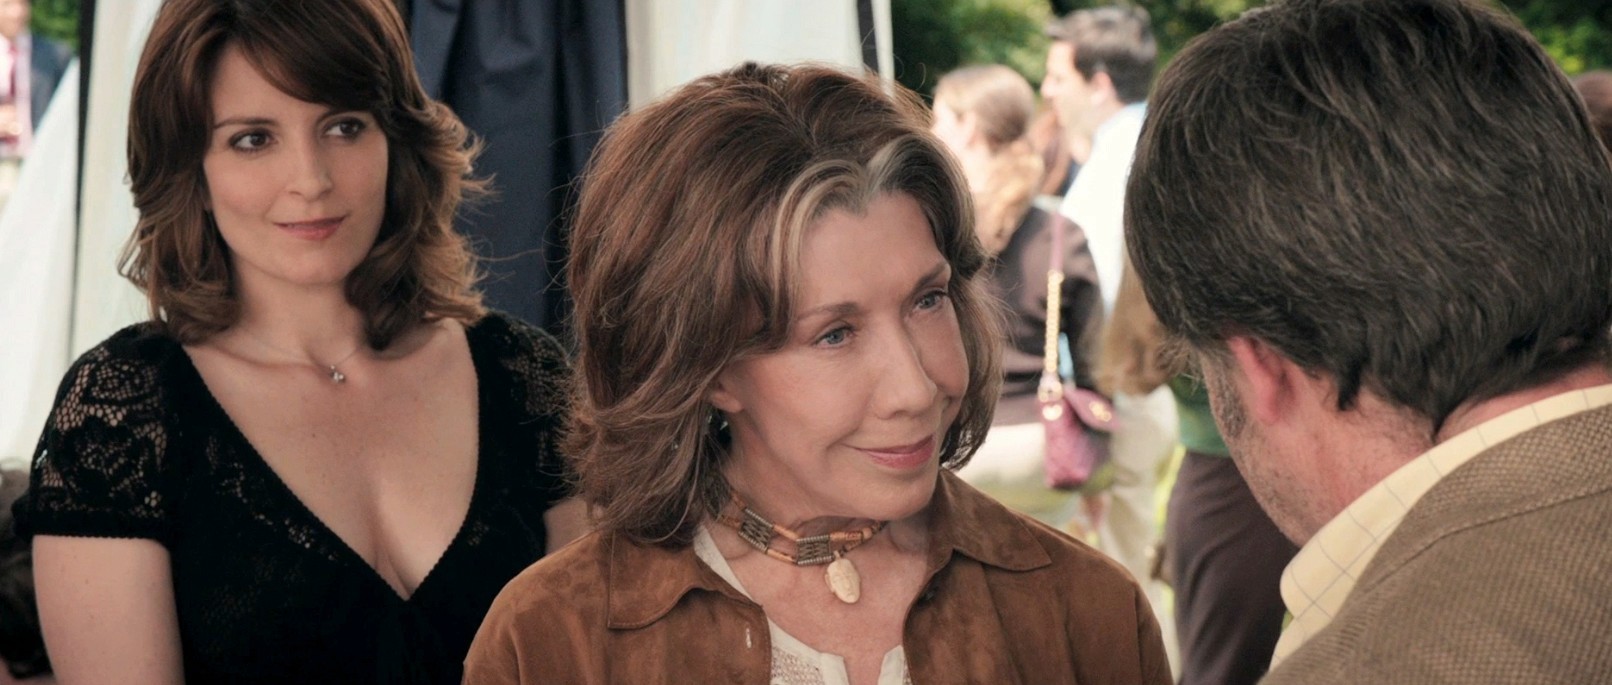 Tina Fey (stars as Portia Nathan) and Lily Tomlin in Focus Features' Admission (2013)